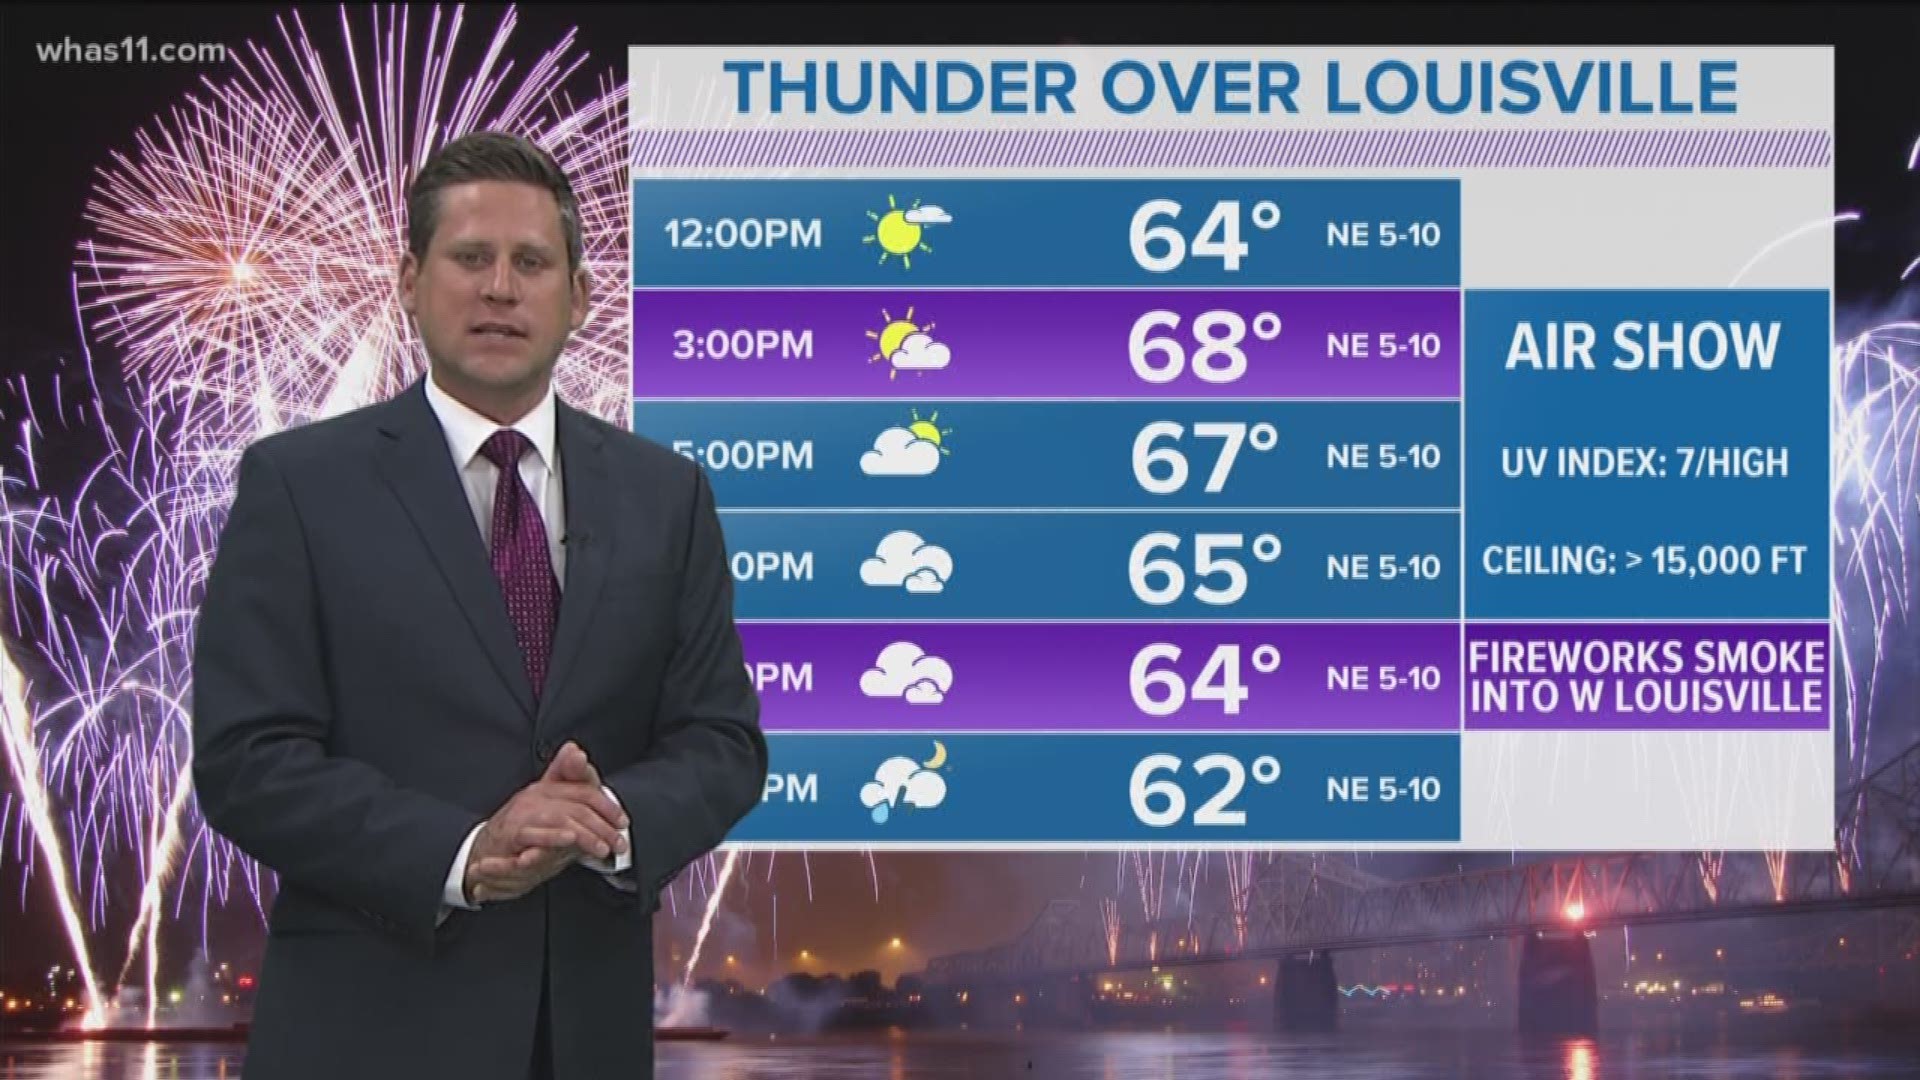 First look at Thunder Over Louisville weather